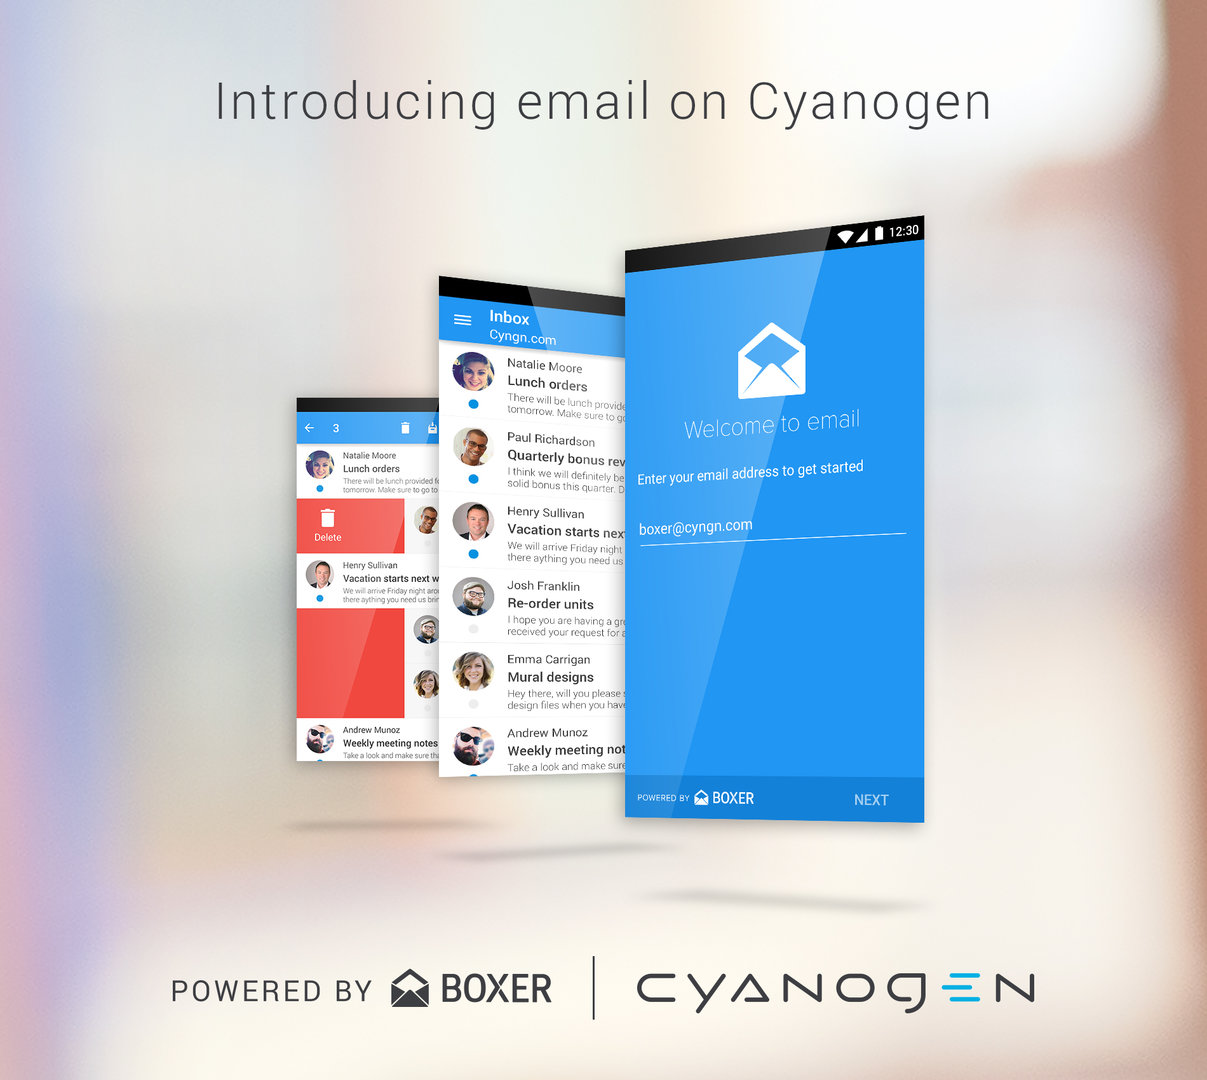 Cyanogen E-Mail powered by Boxer